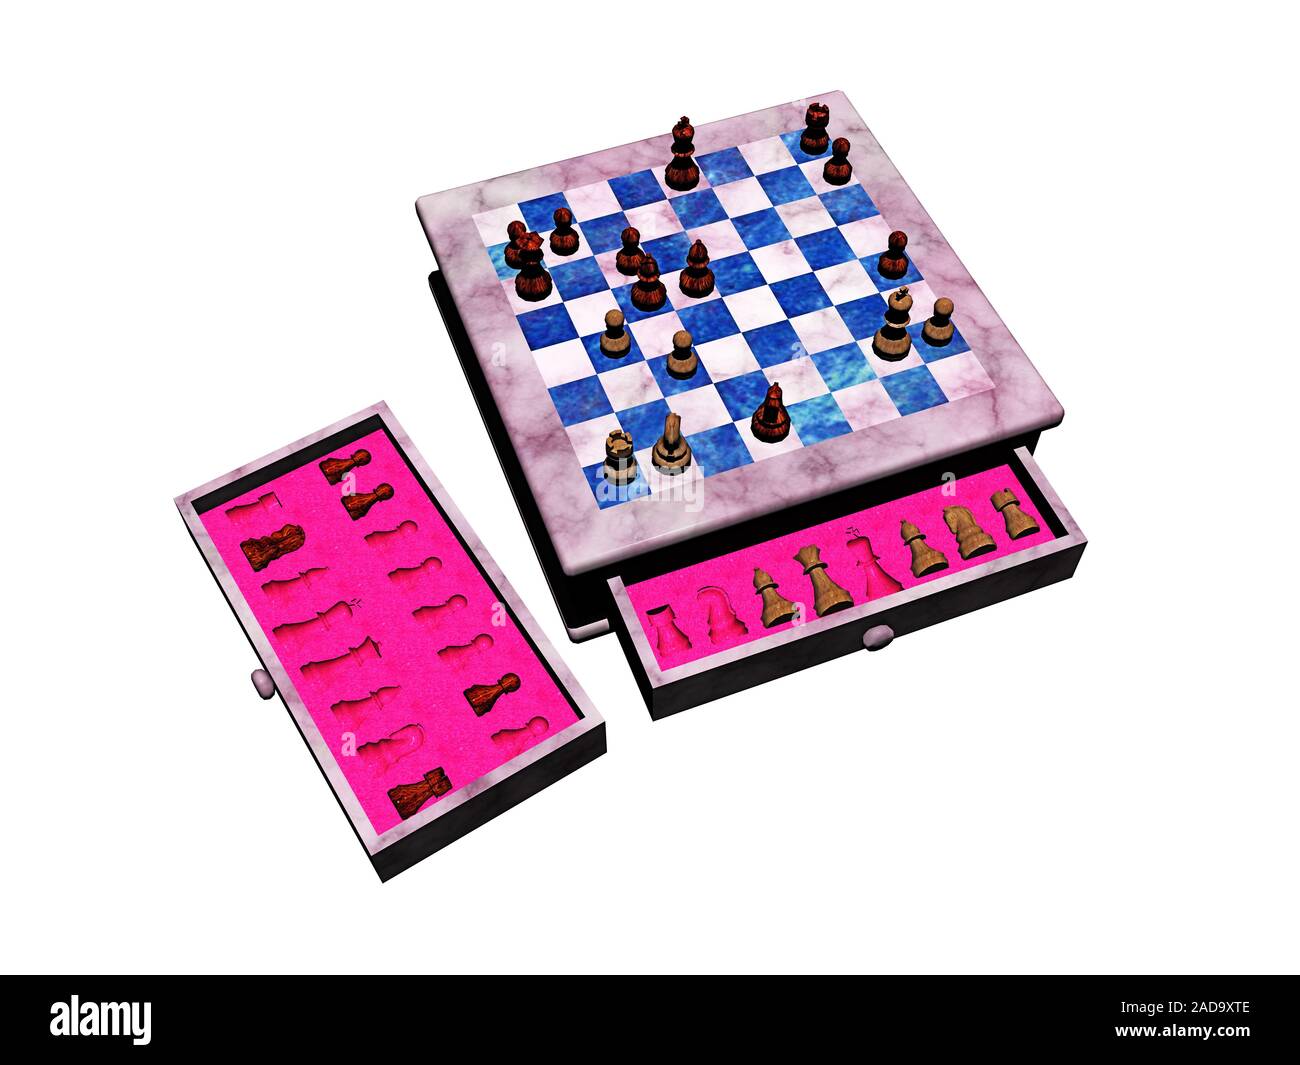 Chess game with drawers for playing pieces Stock Photo